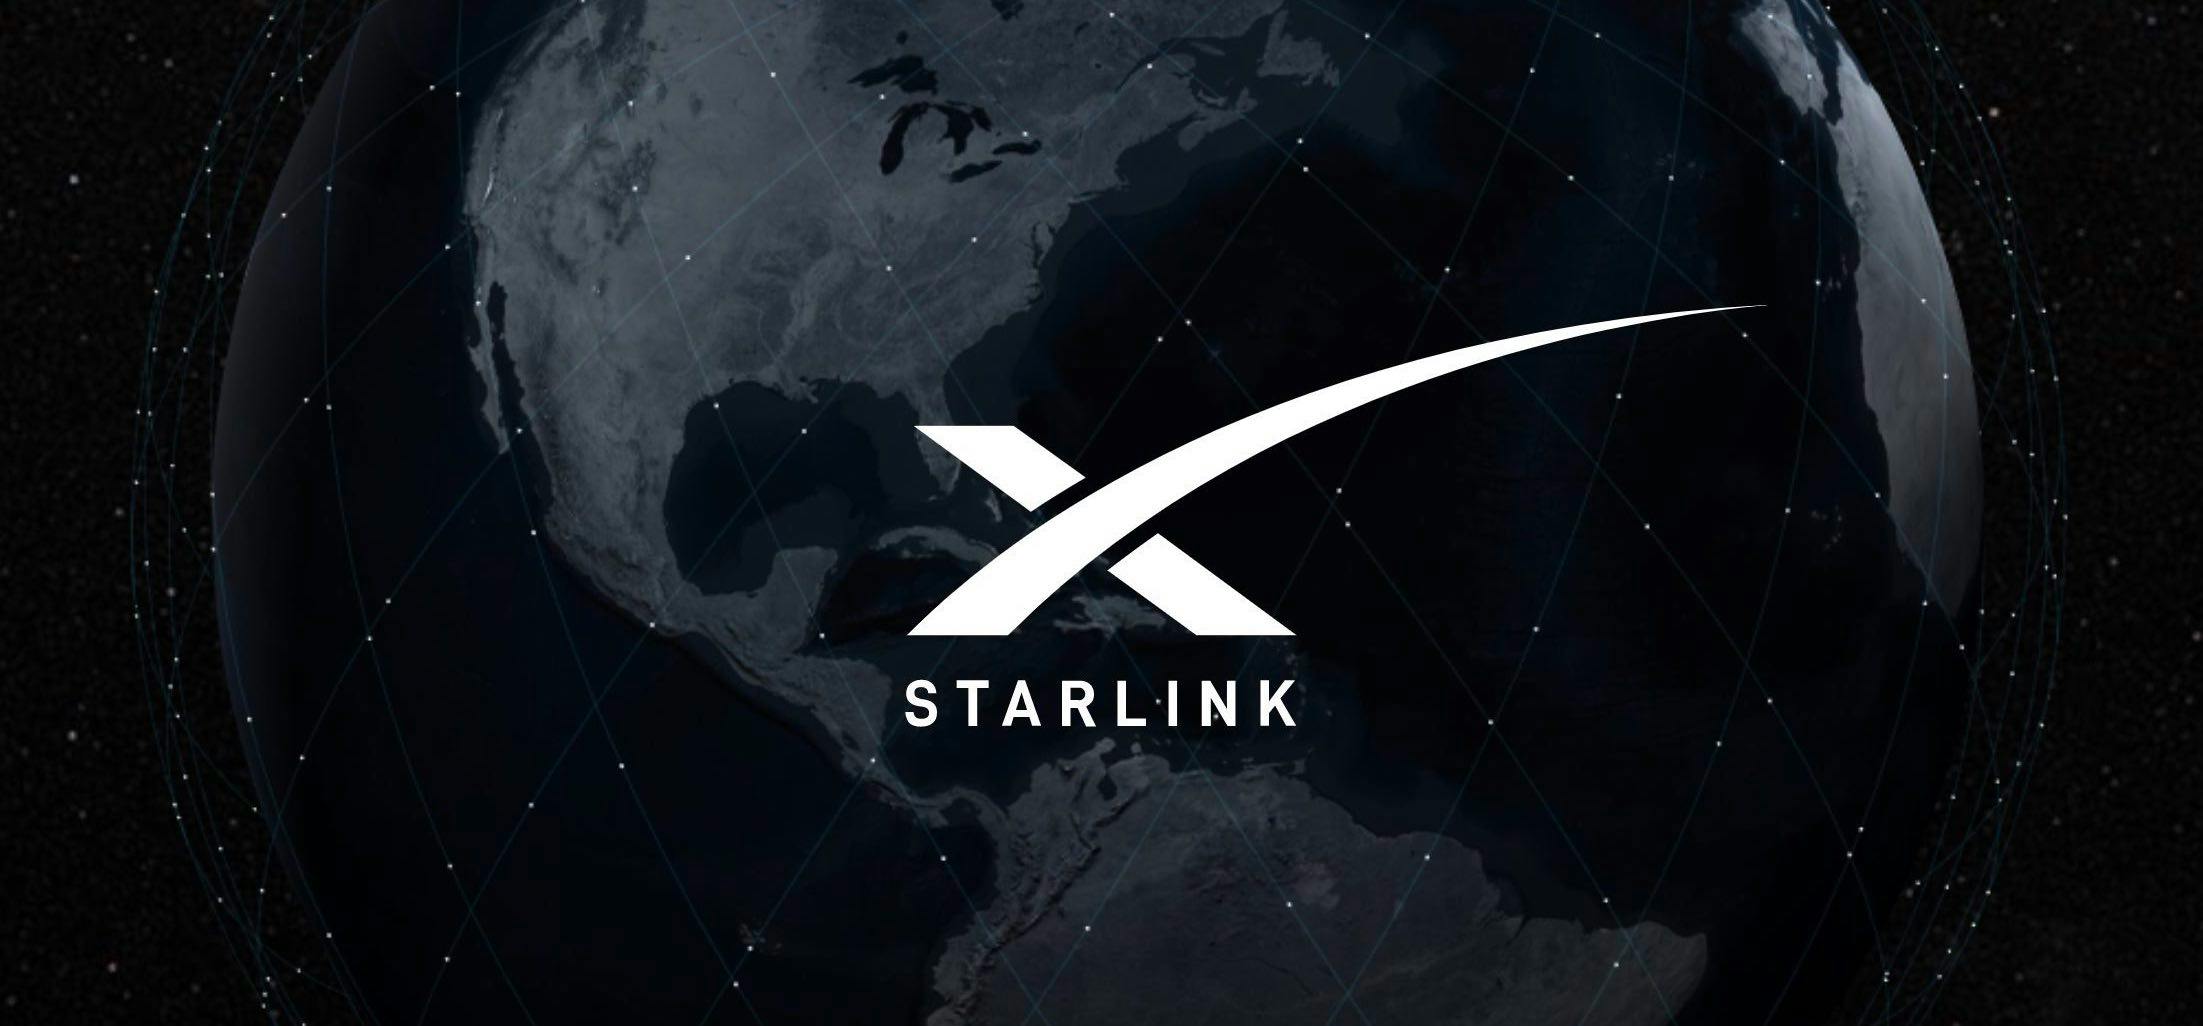 Things You Probably Didn't Know About Starlink By Spacex.